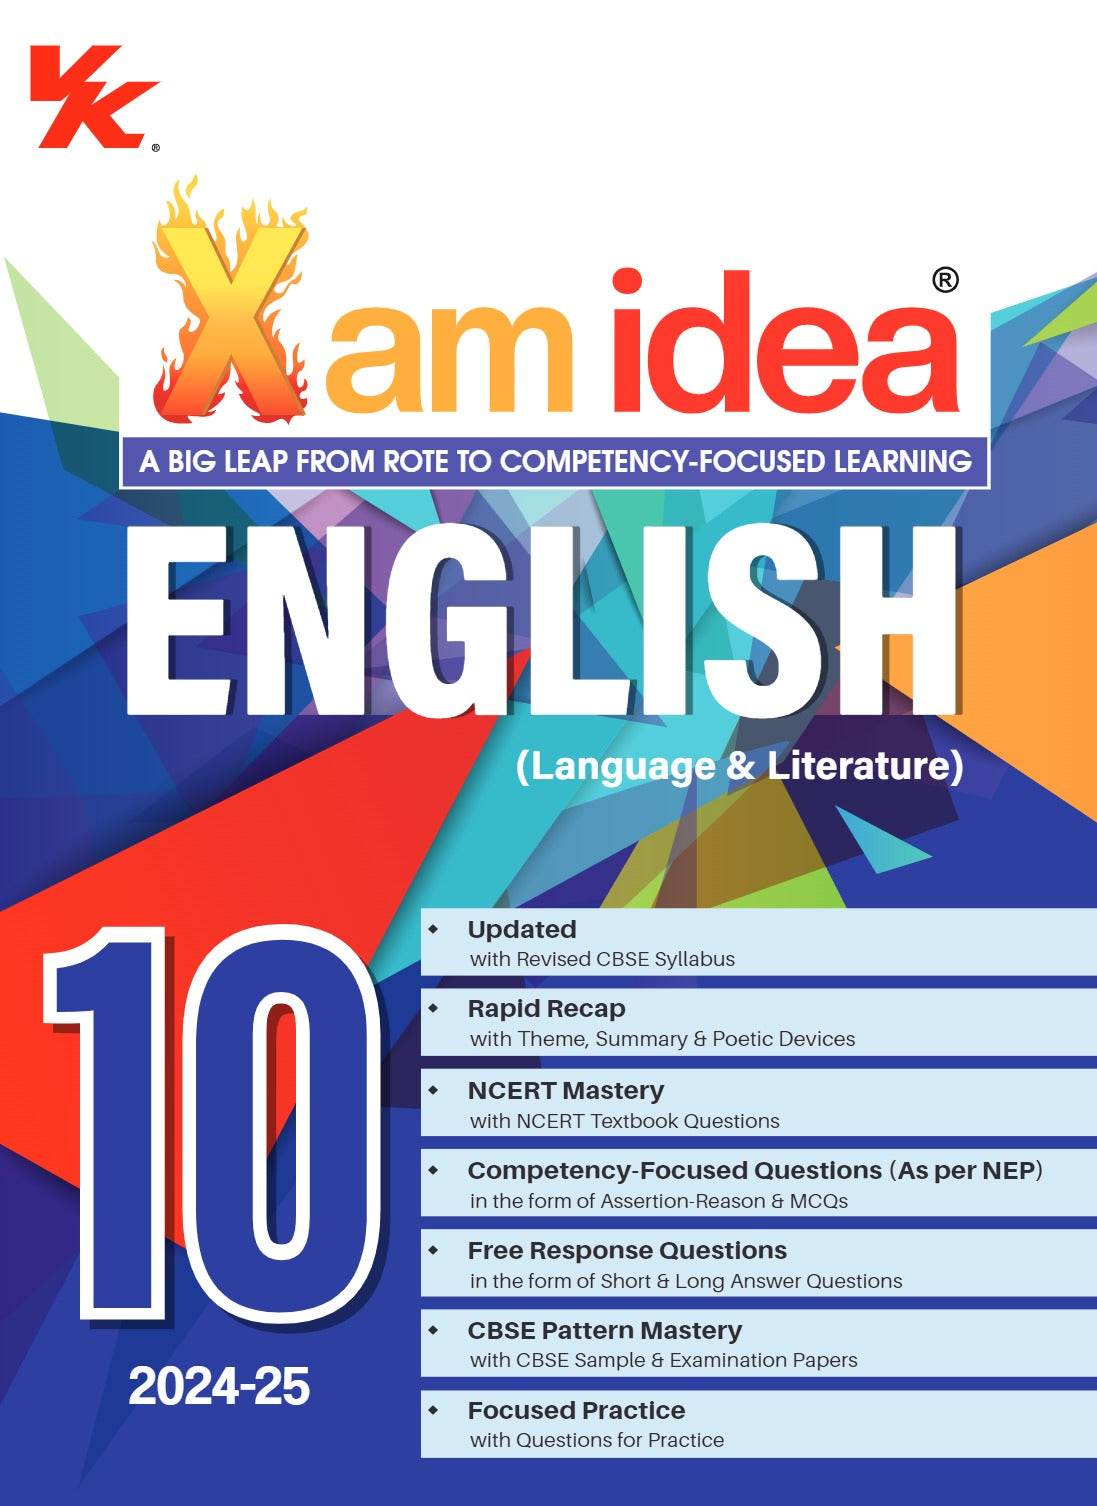 Xam idea English (Language & Literature) Class 10 Book | CBSE Board | Chapterwise Question Bank | Based on Revised CBSE Syllabus | NCERT Questions Included | 2024-25 Exam